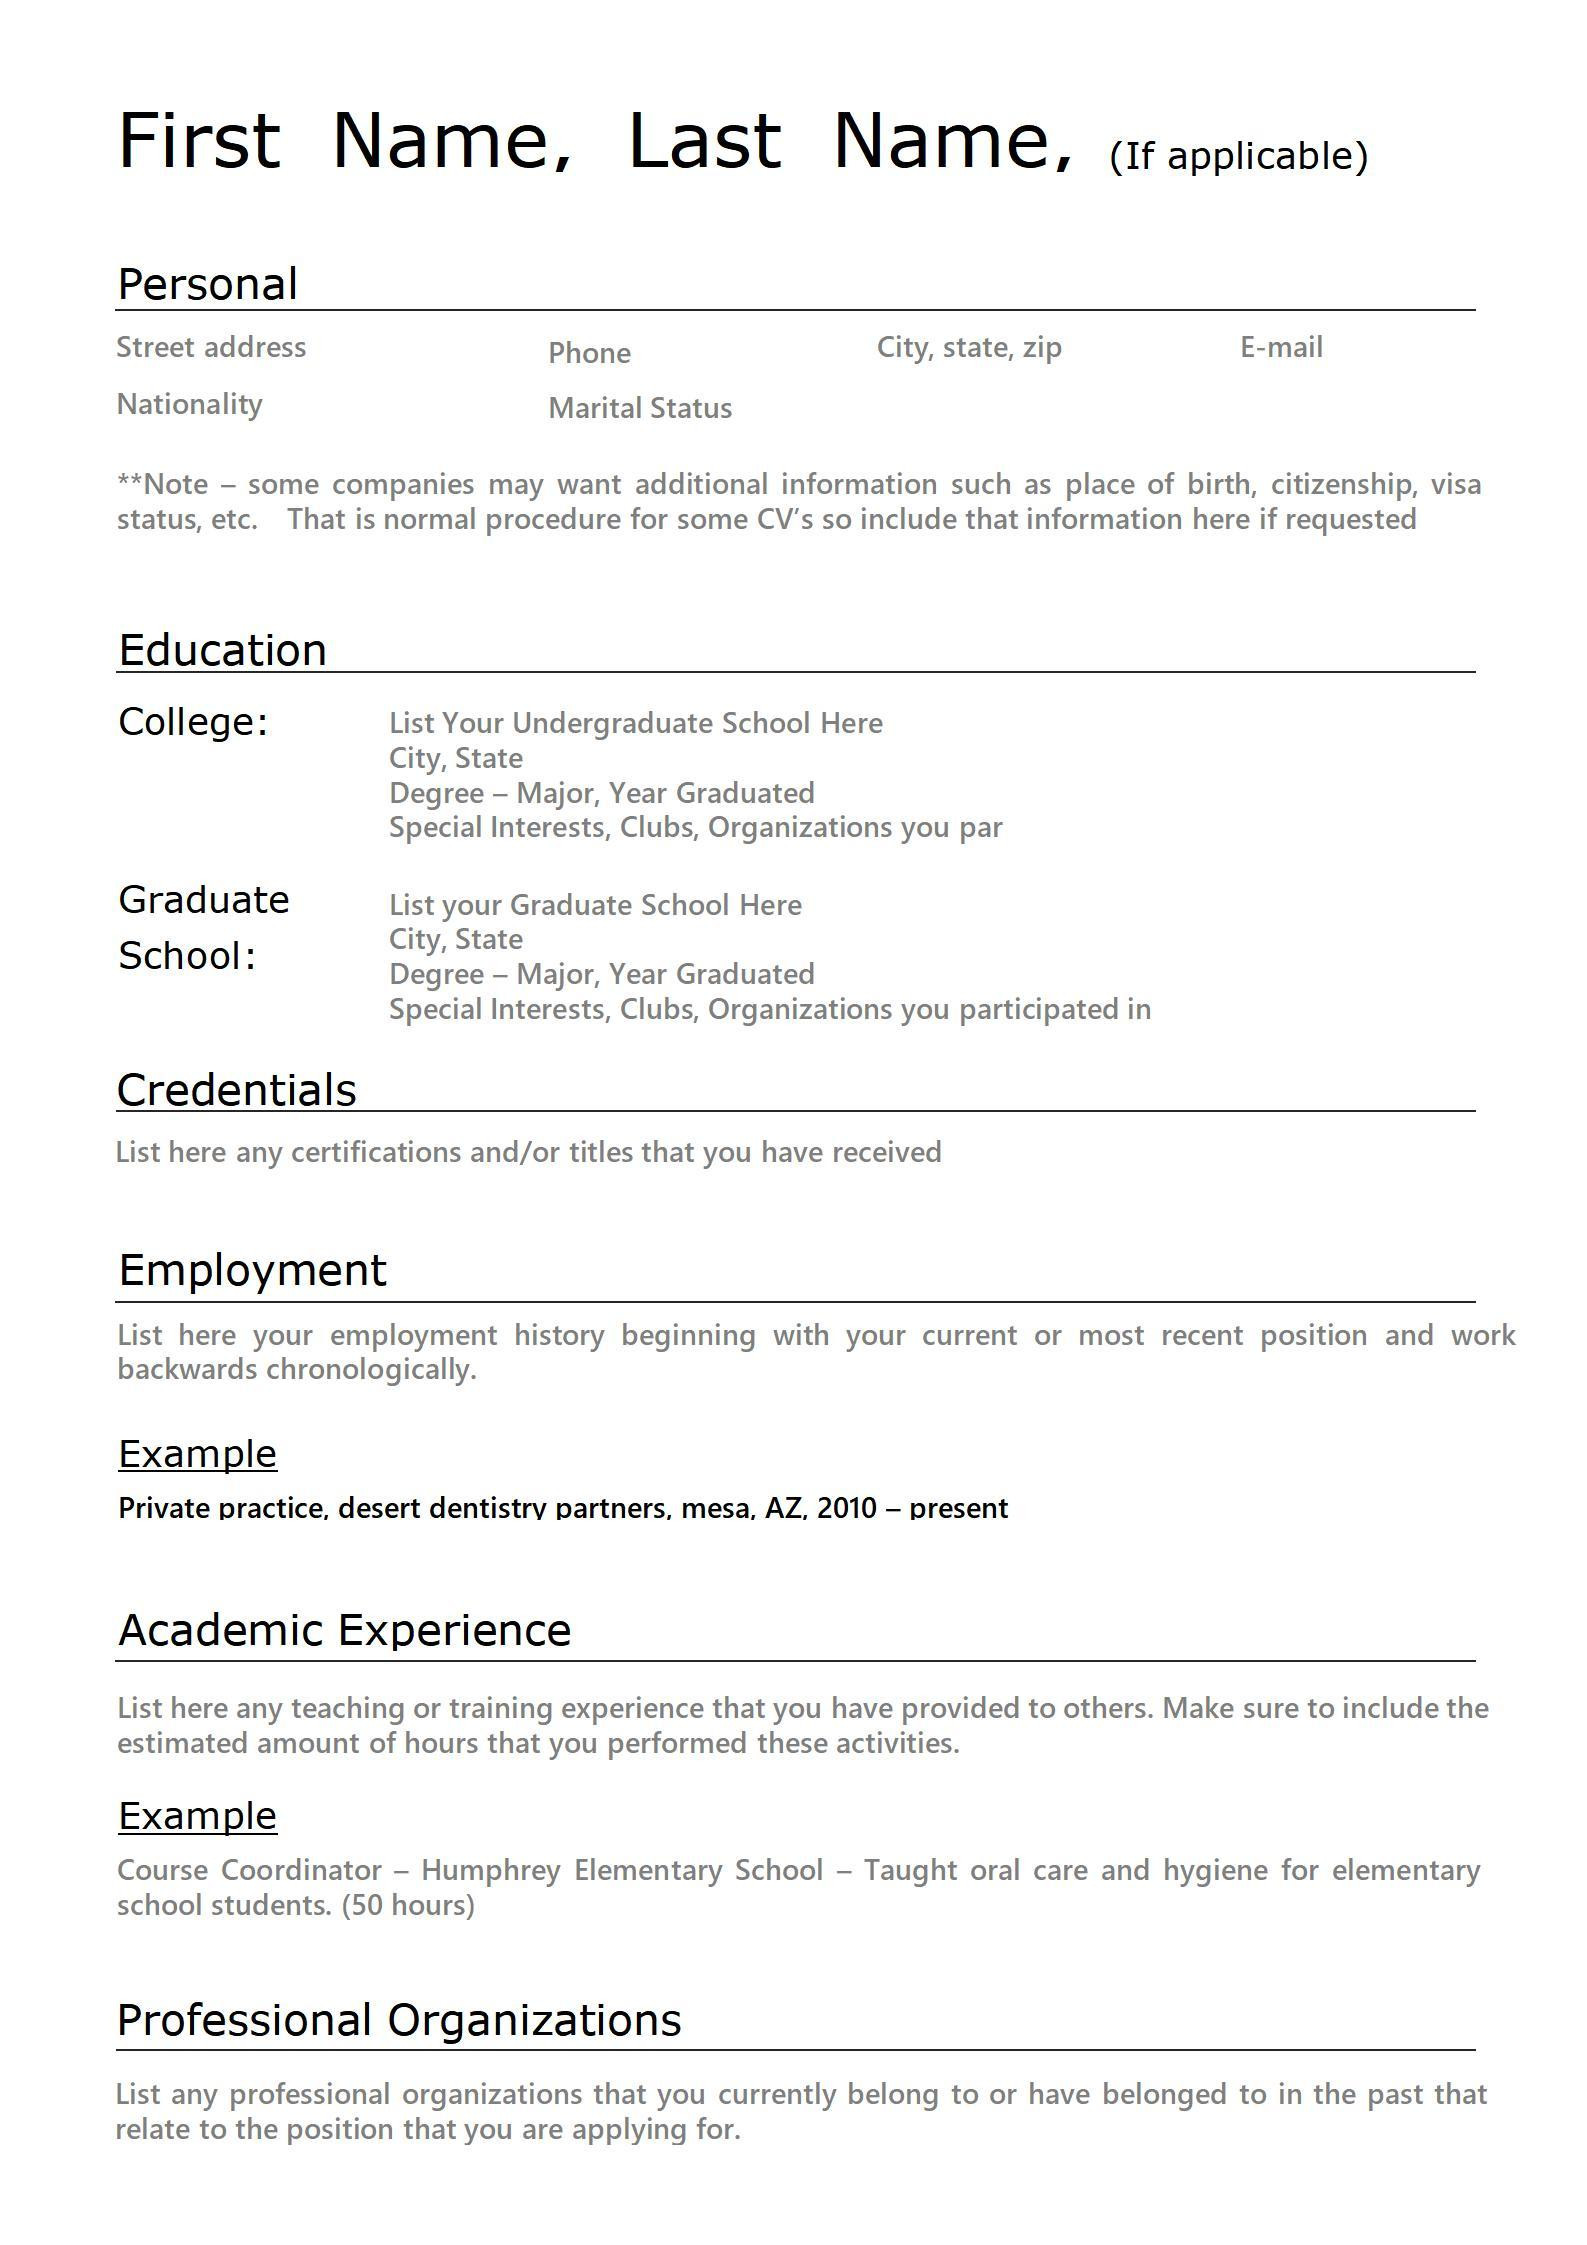 Sample Resume for Non High School Graduate First-time Resume with No Experience Samples Wps Office Academy